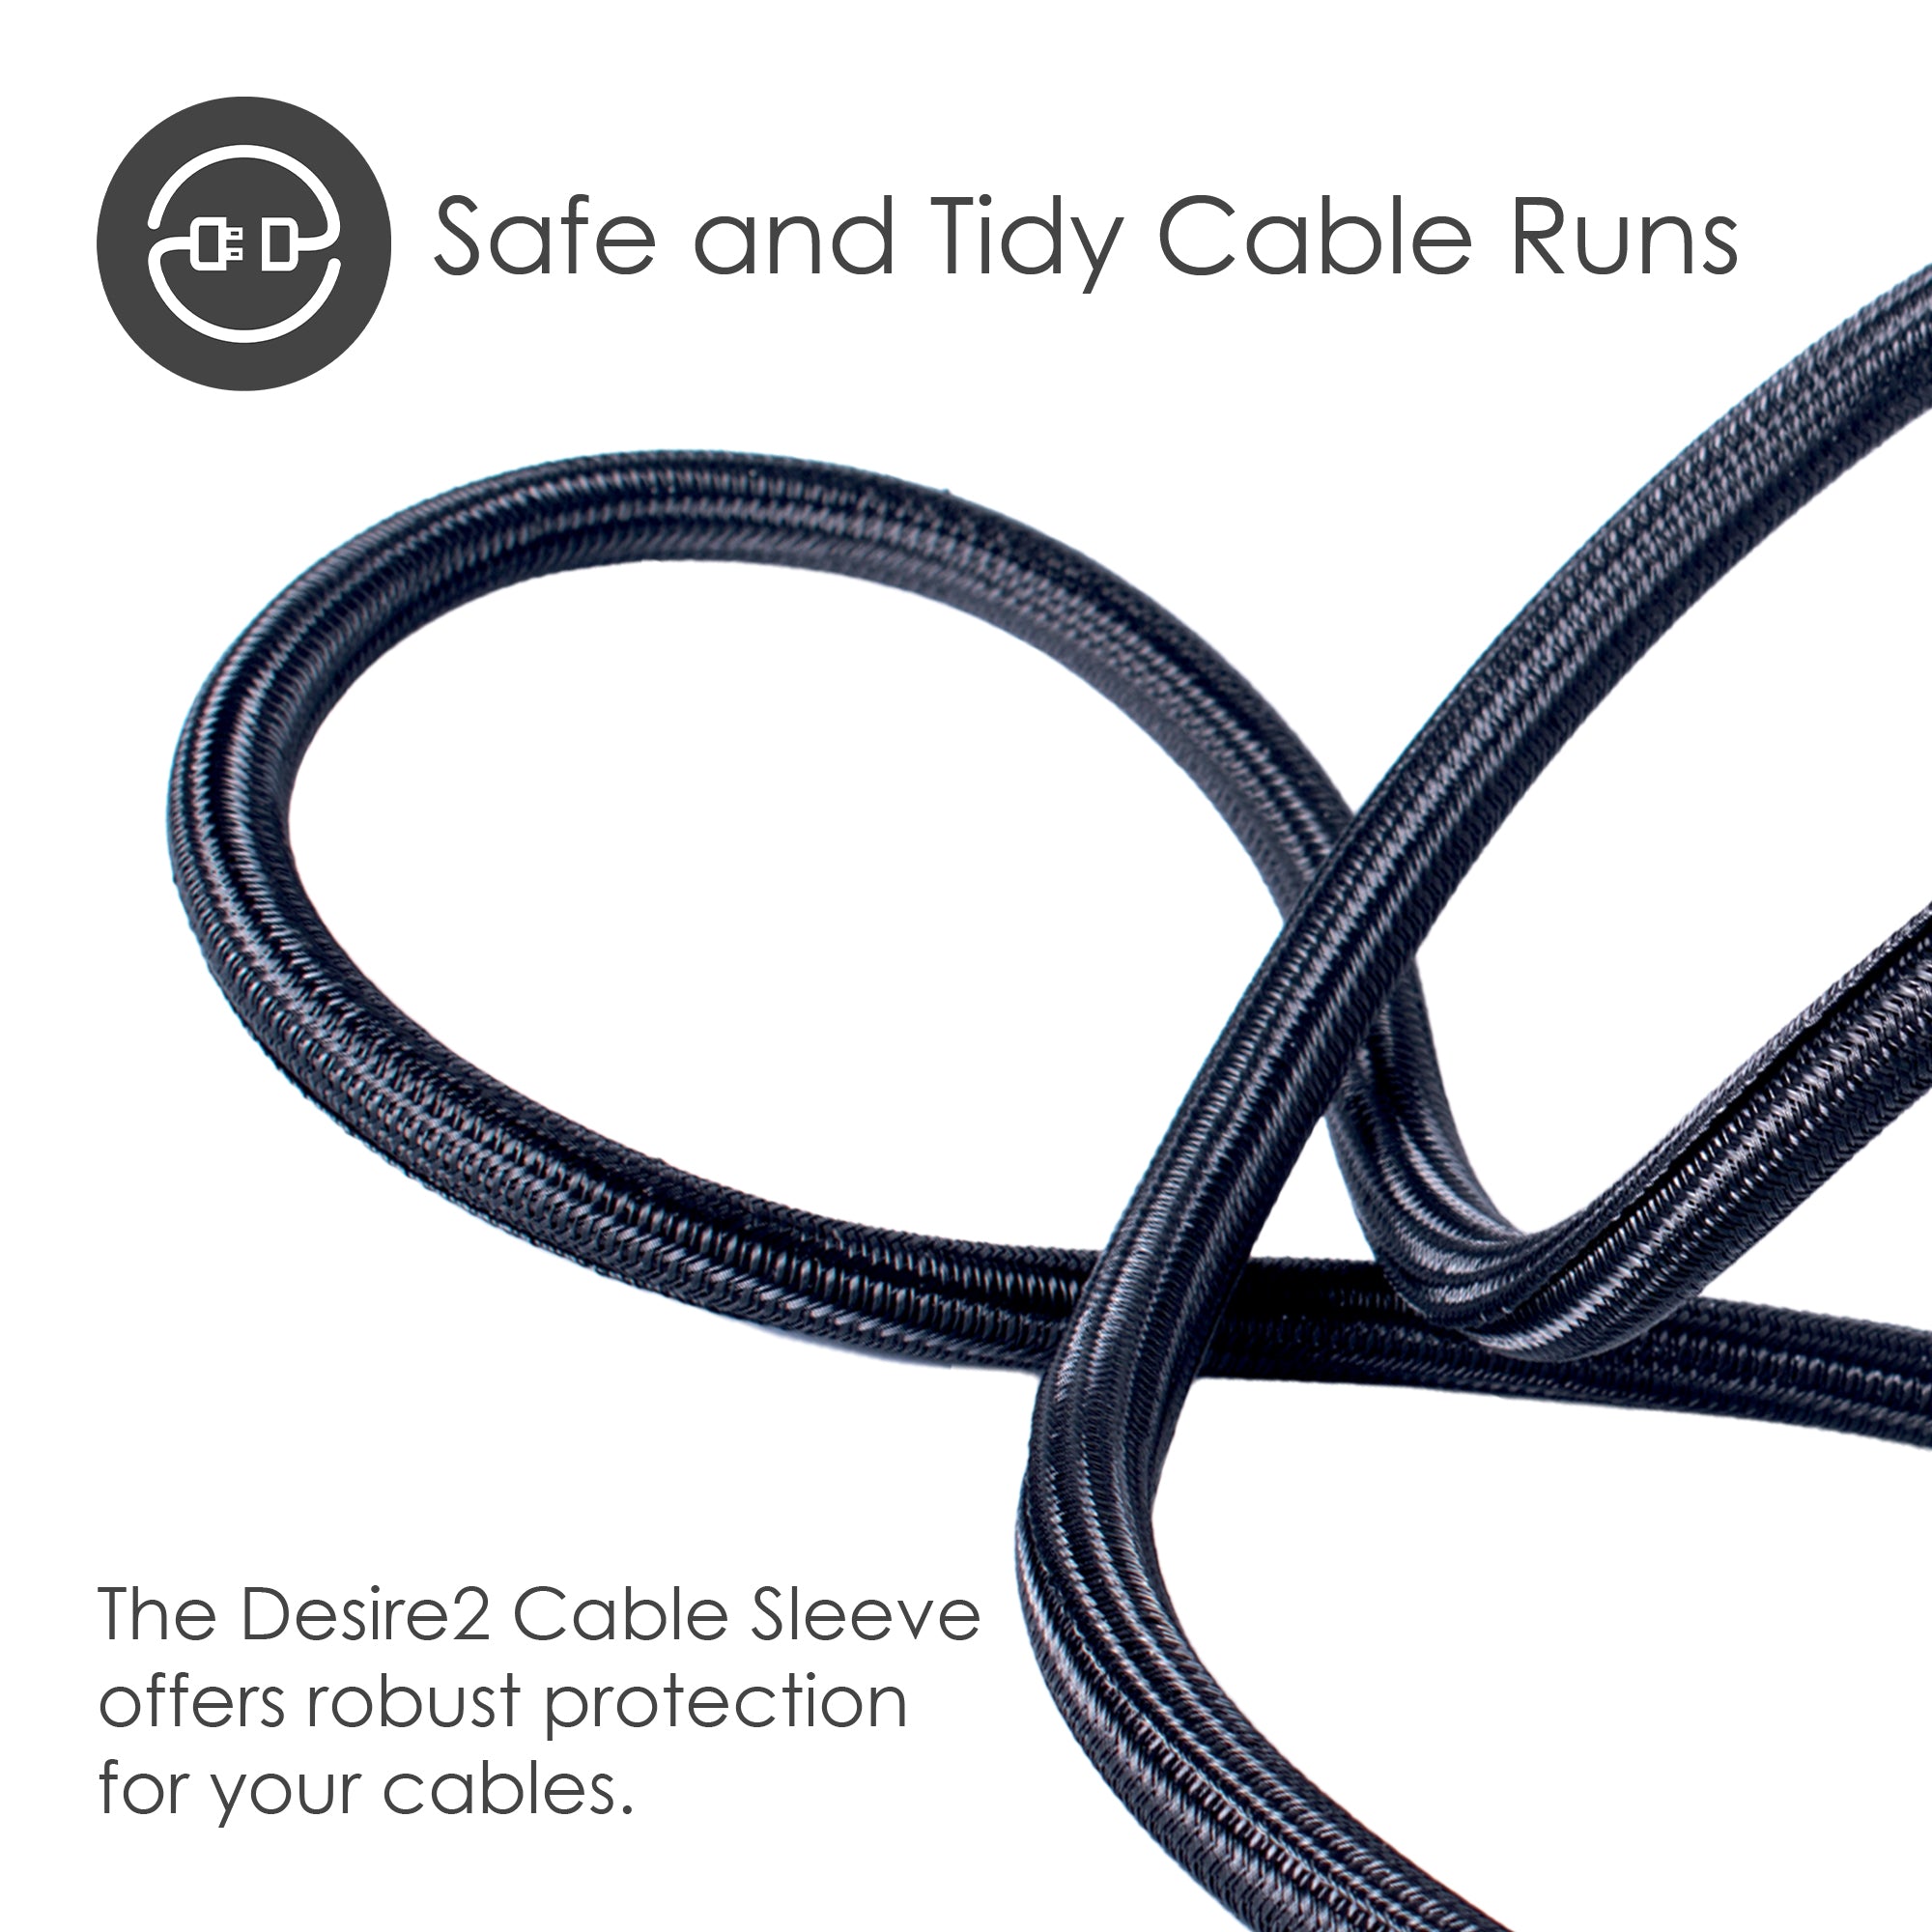 Deskmate Cable Sleeve 4m